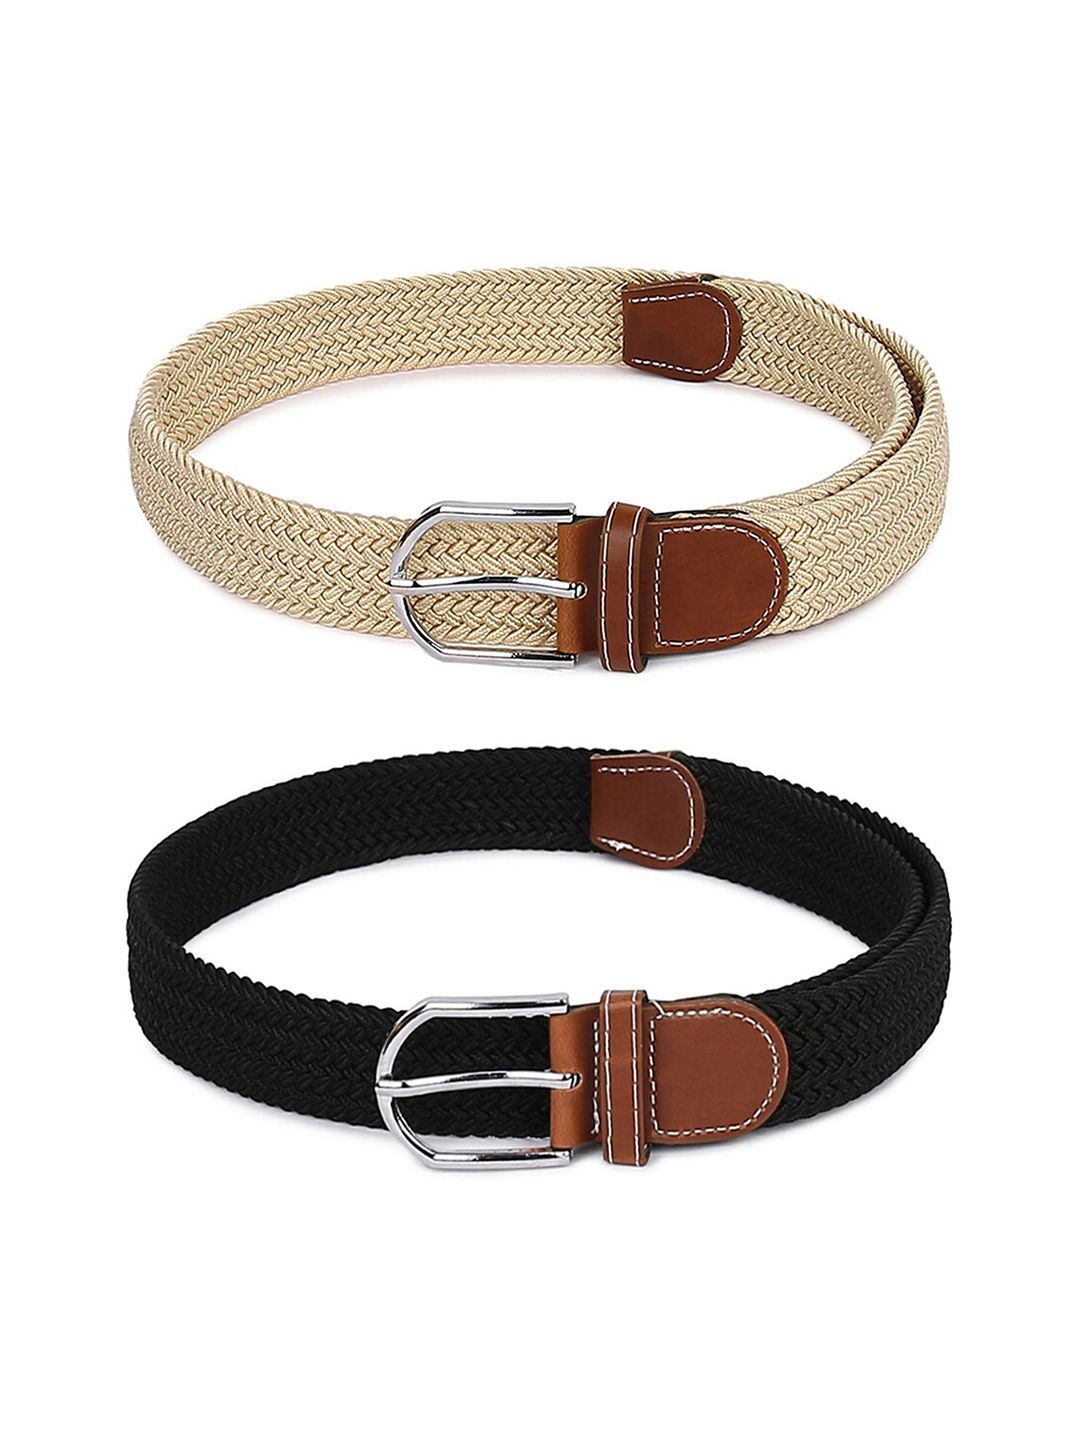 CRUSSET Women Cream & Black Woven Design Pack of 2 Belts Price in India